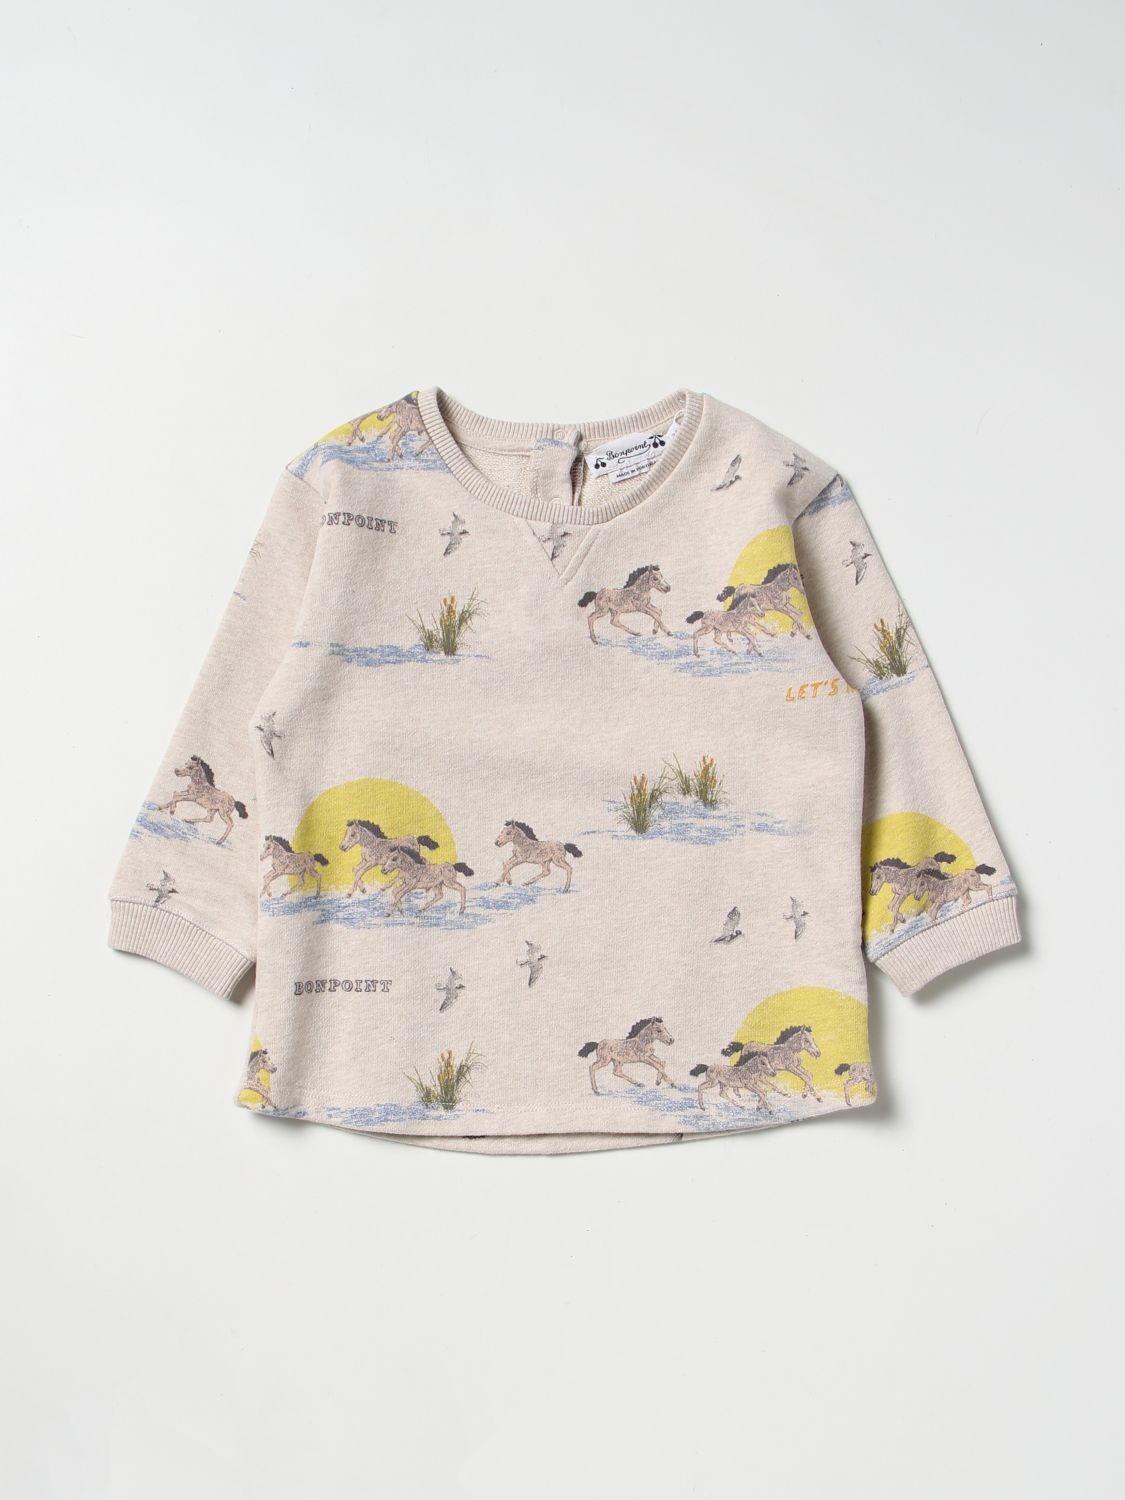 BONPOINT: sweater for baby - Beige | Bonpoint sweater S03YSWK00100 ...